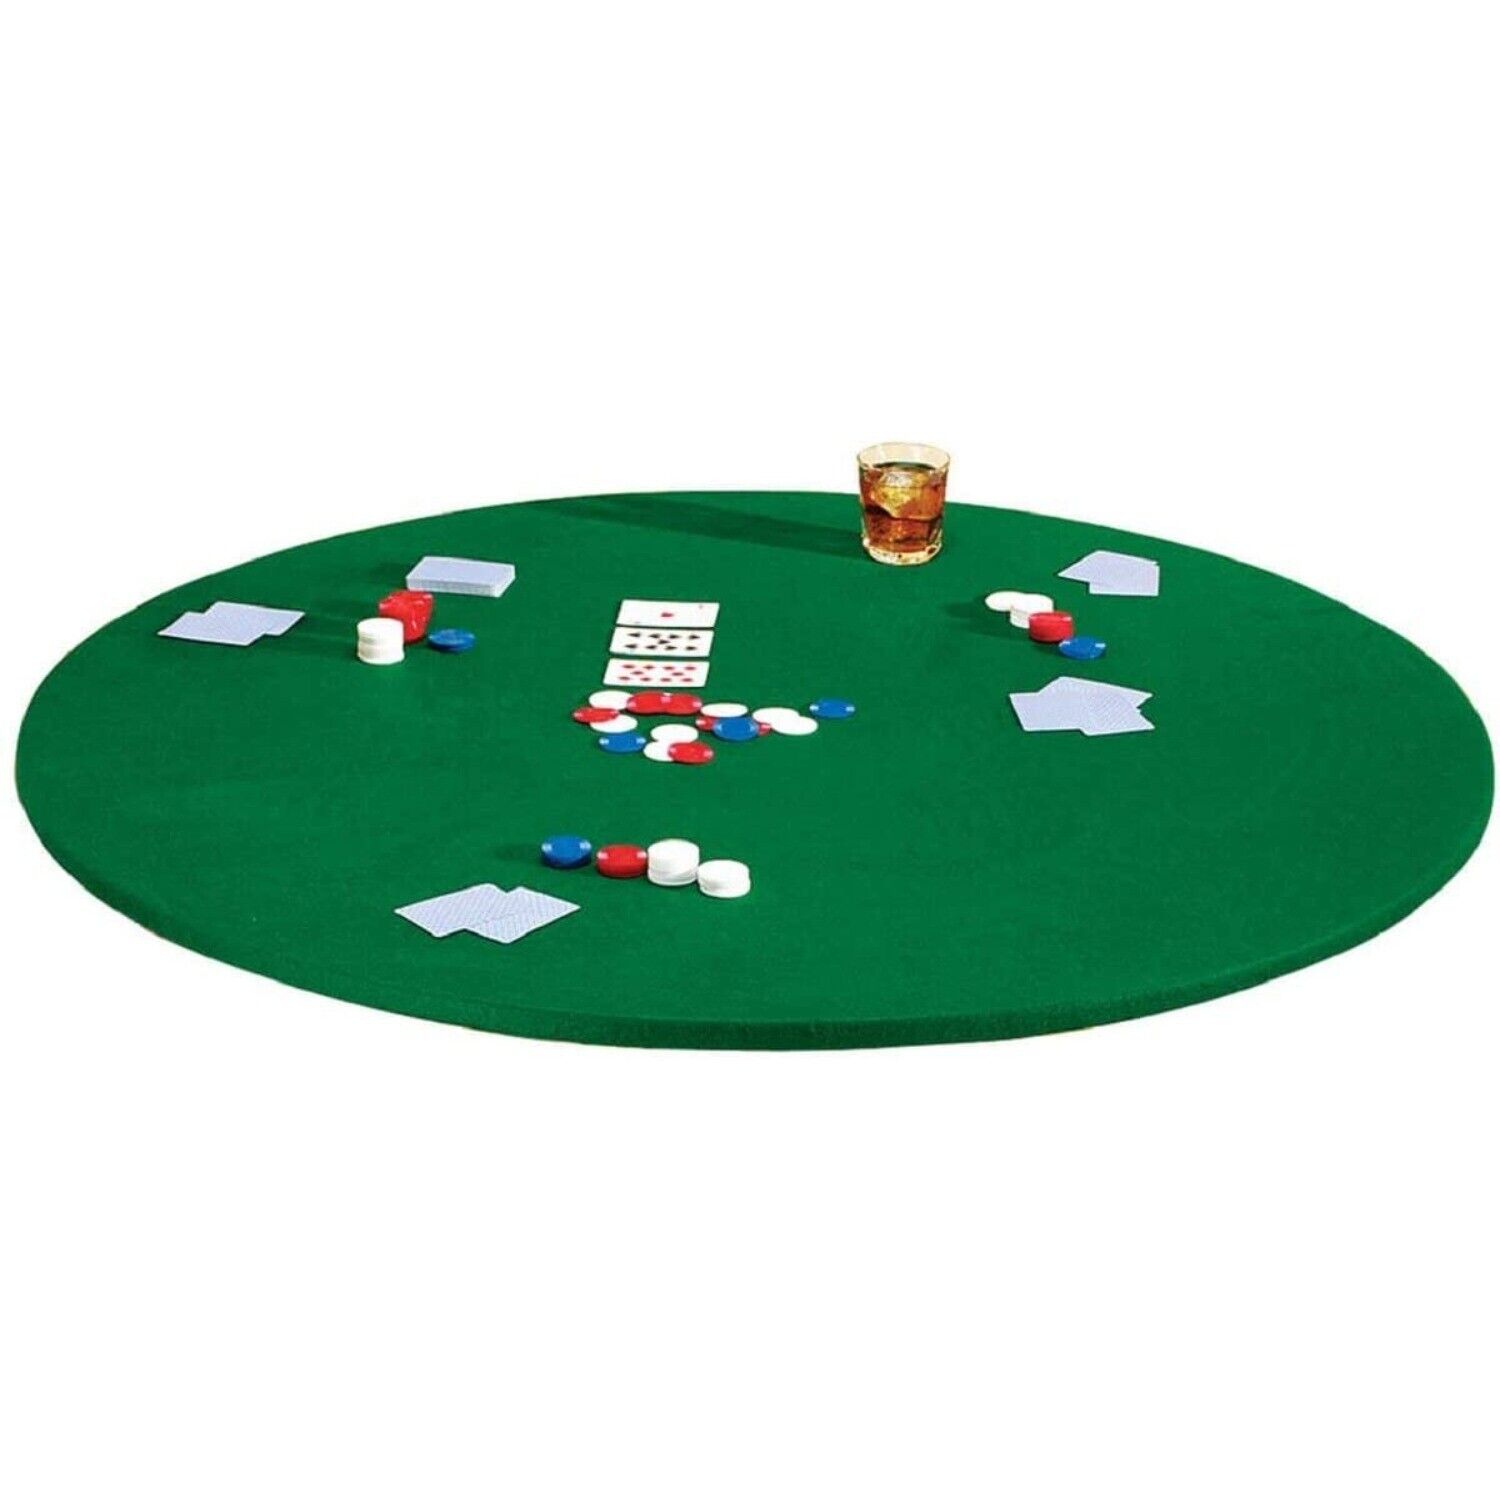 Solid Green Felt Fitted Cover For Poker Fits 36" To 48" Round & 36" Square Table